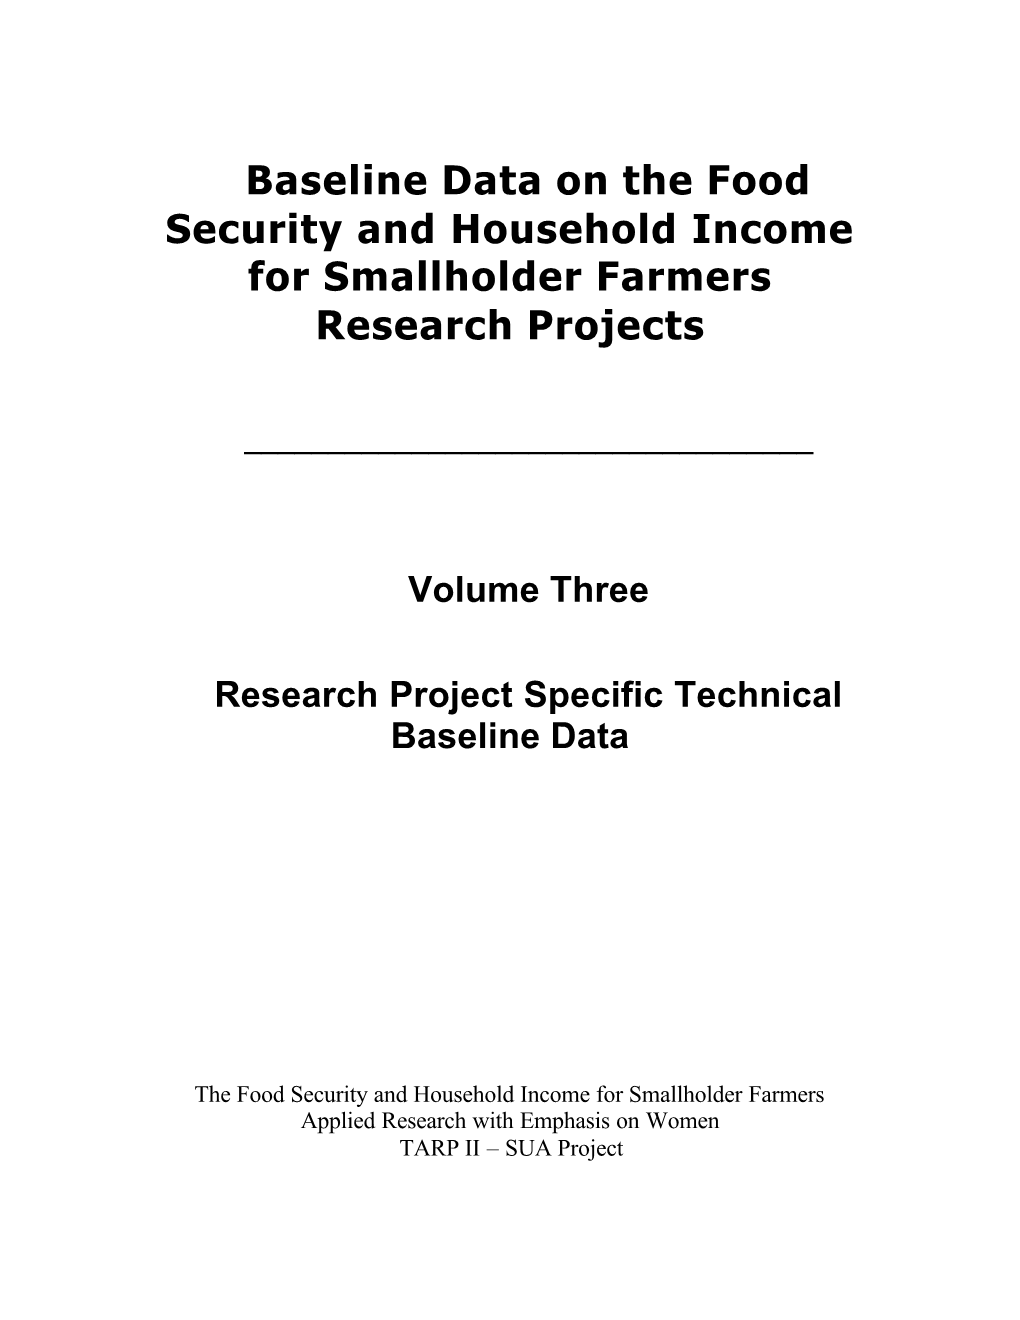 Baseline Data on the Food Security and Household Income for Smallholder Farmers Research Projects